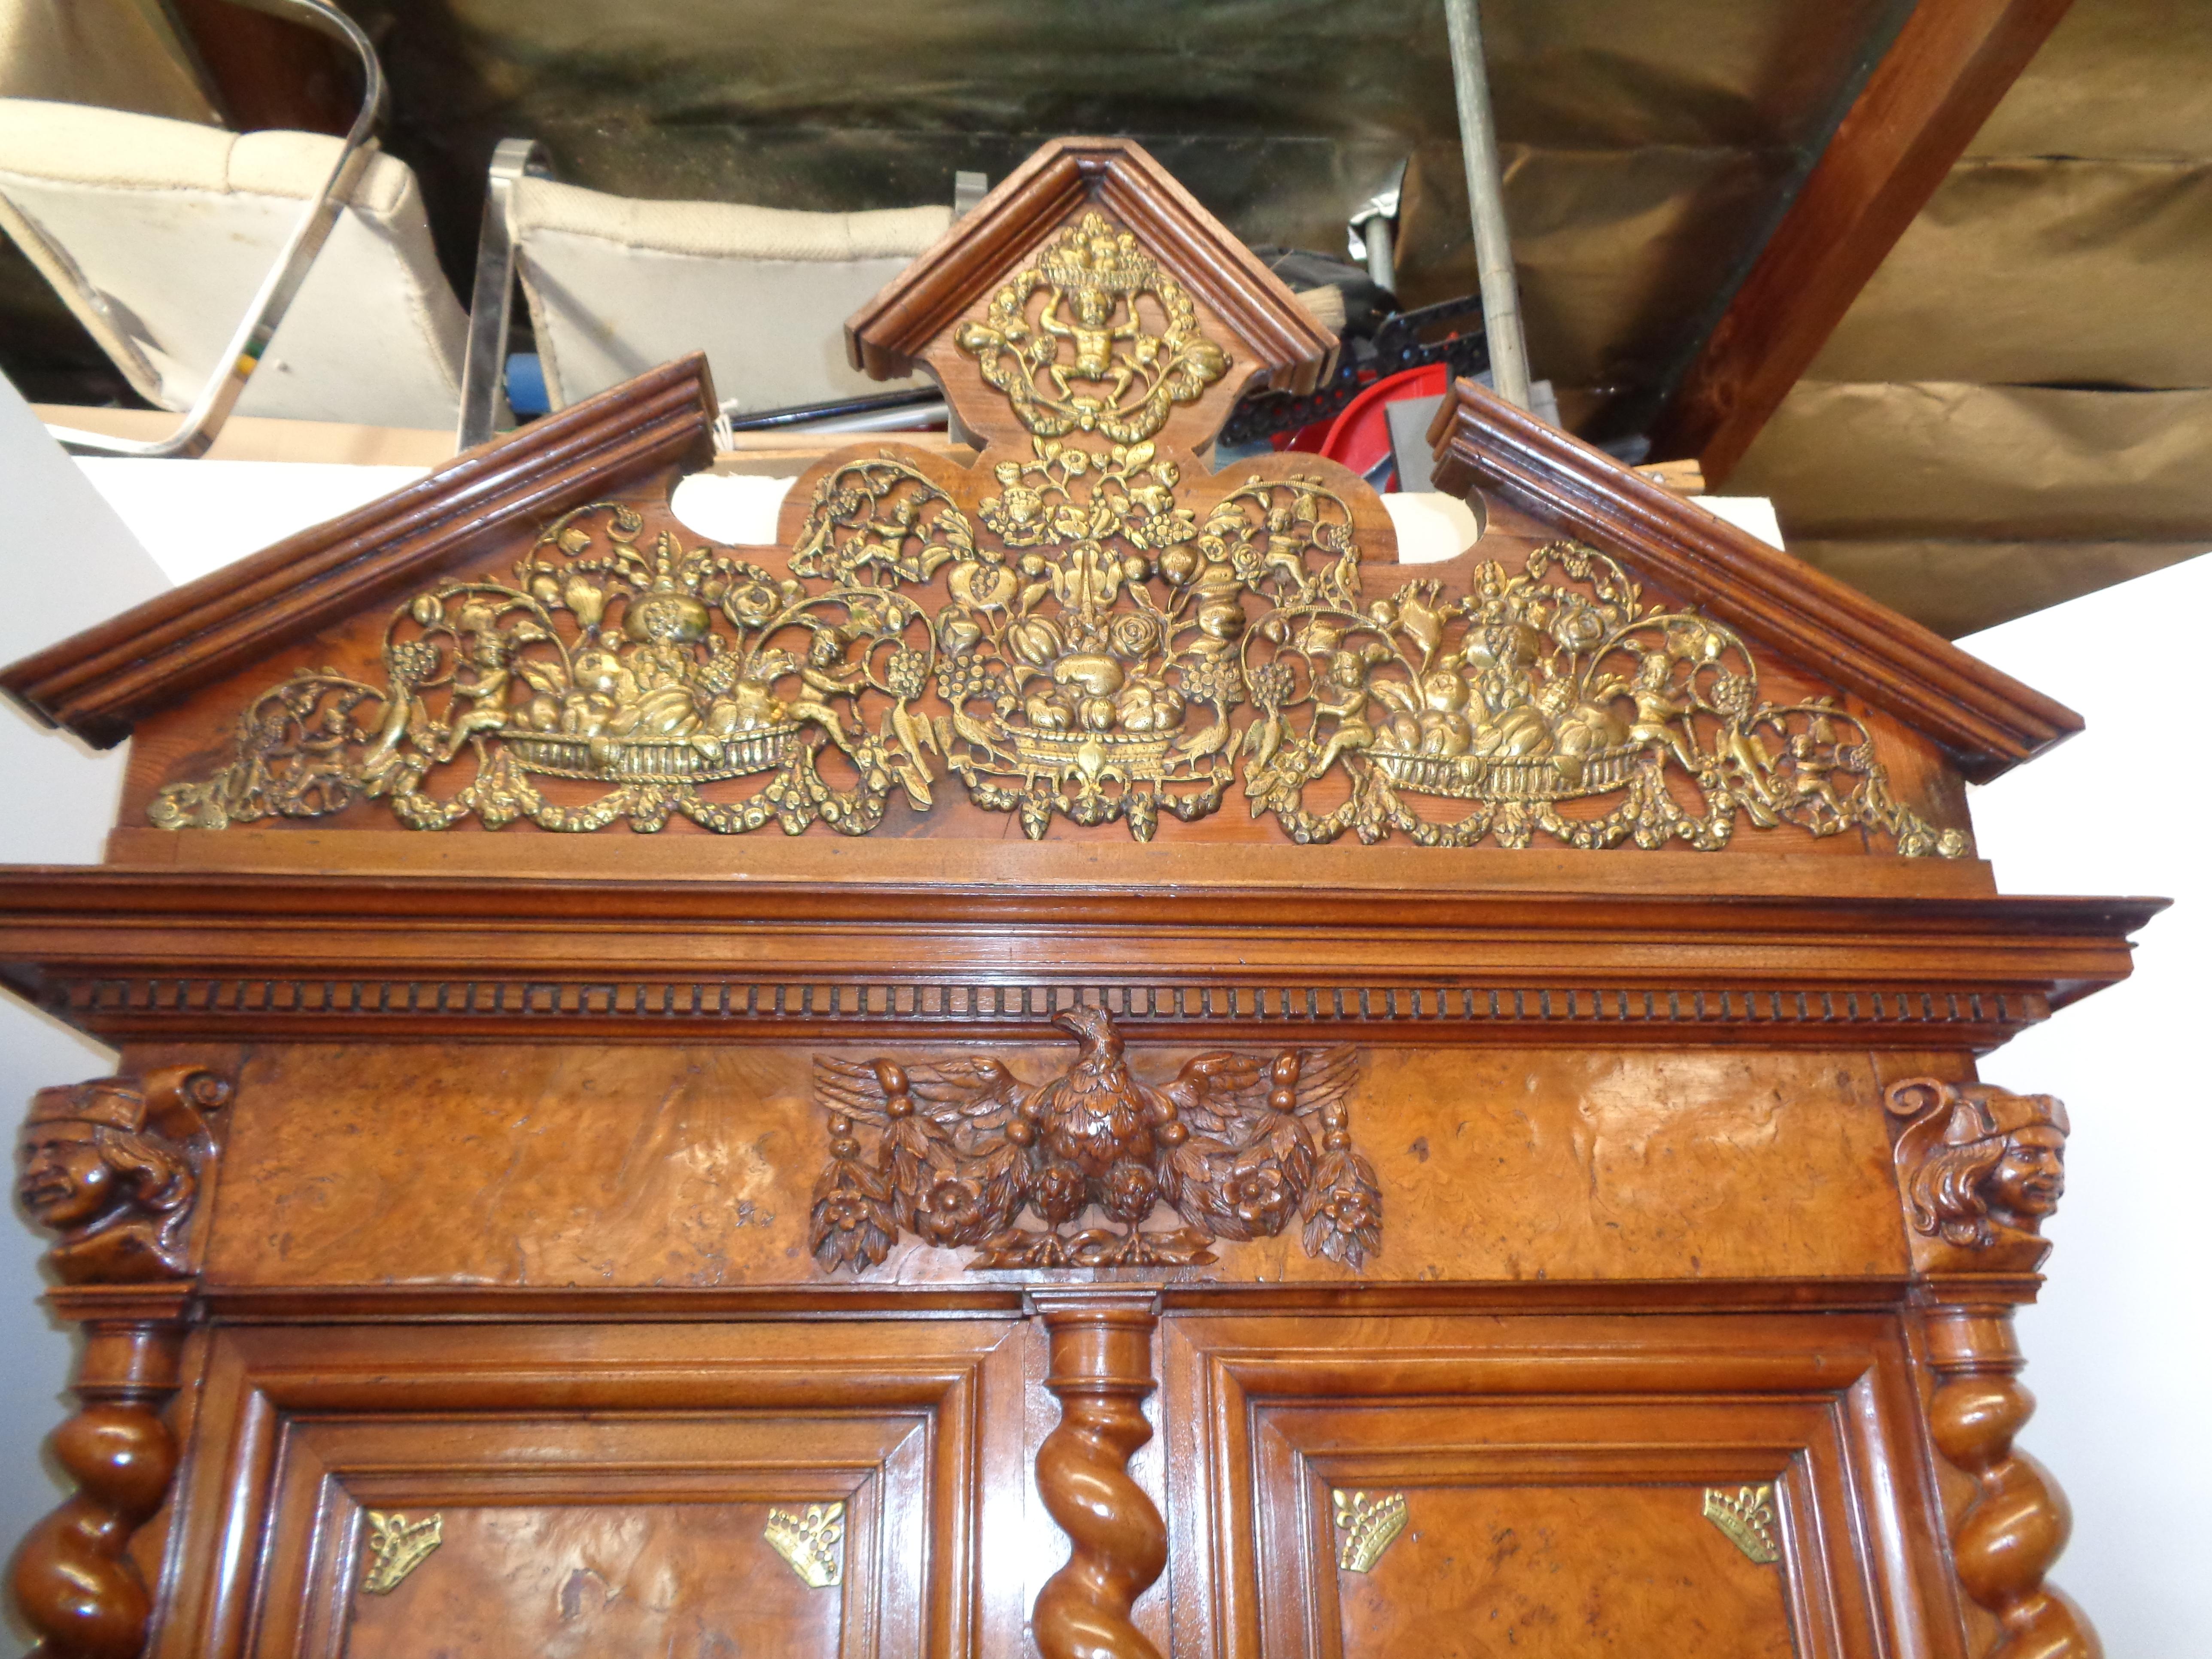 This rare buffet deus corps has a slanted pediment top adorned with heavy bronze mounts depicting baskets of fruit. Above the burled elm cupboard doors at the center is a magnificent three dimensionally carved eagle. Each door is flanked by three